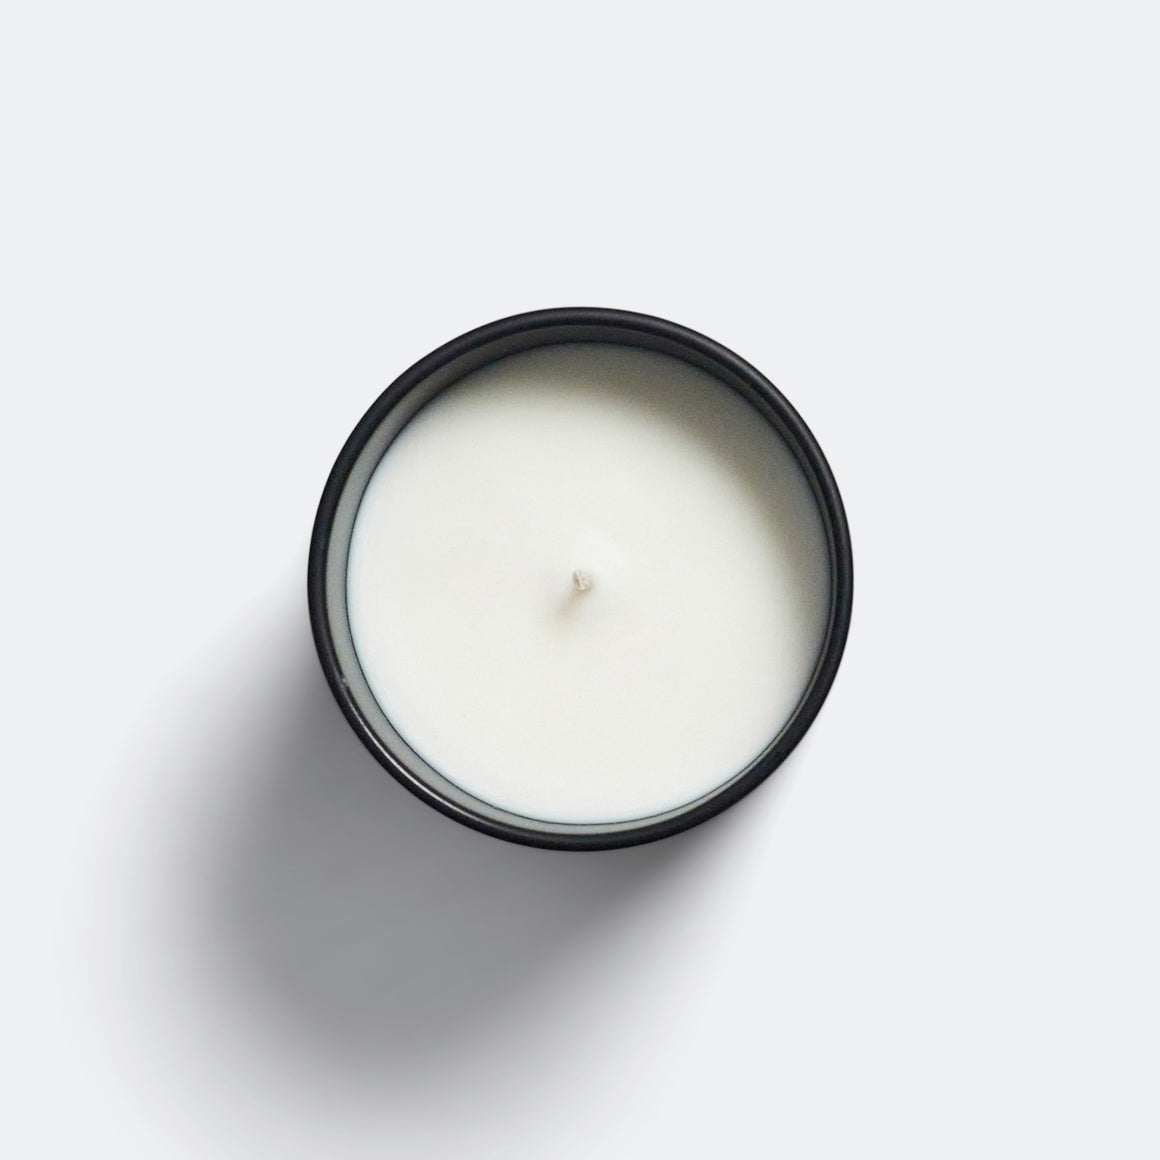 Mihan Aromatics - Sienna Brume Candle - 300g - UP THERE